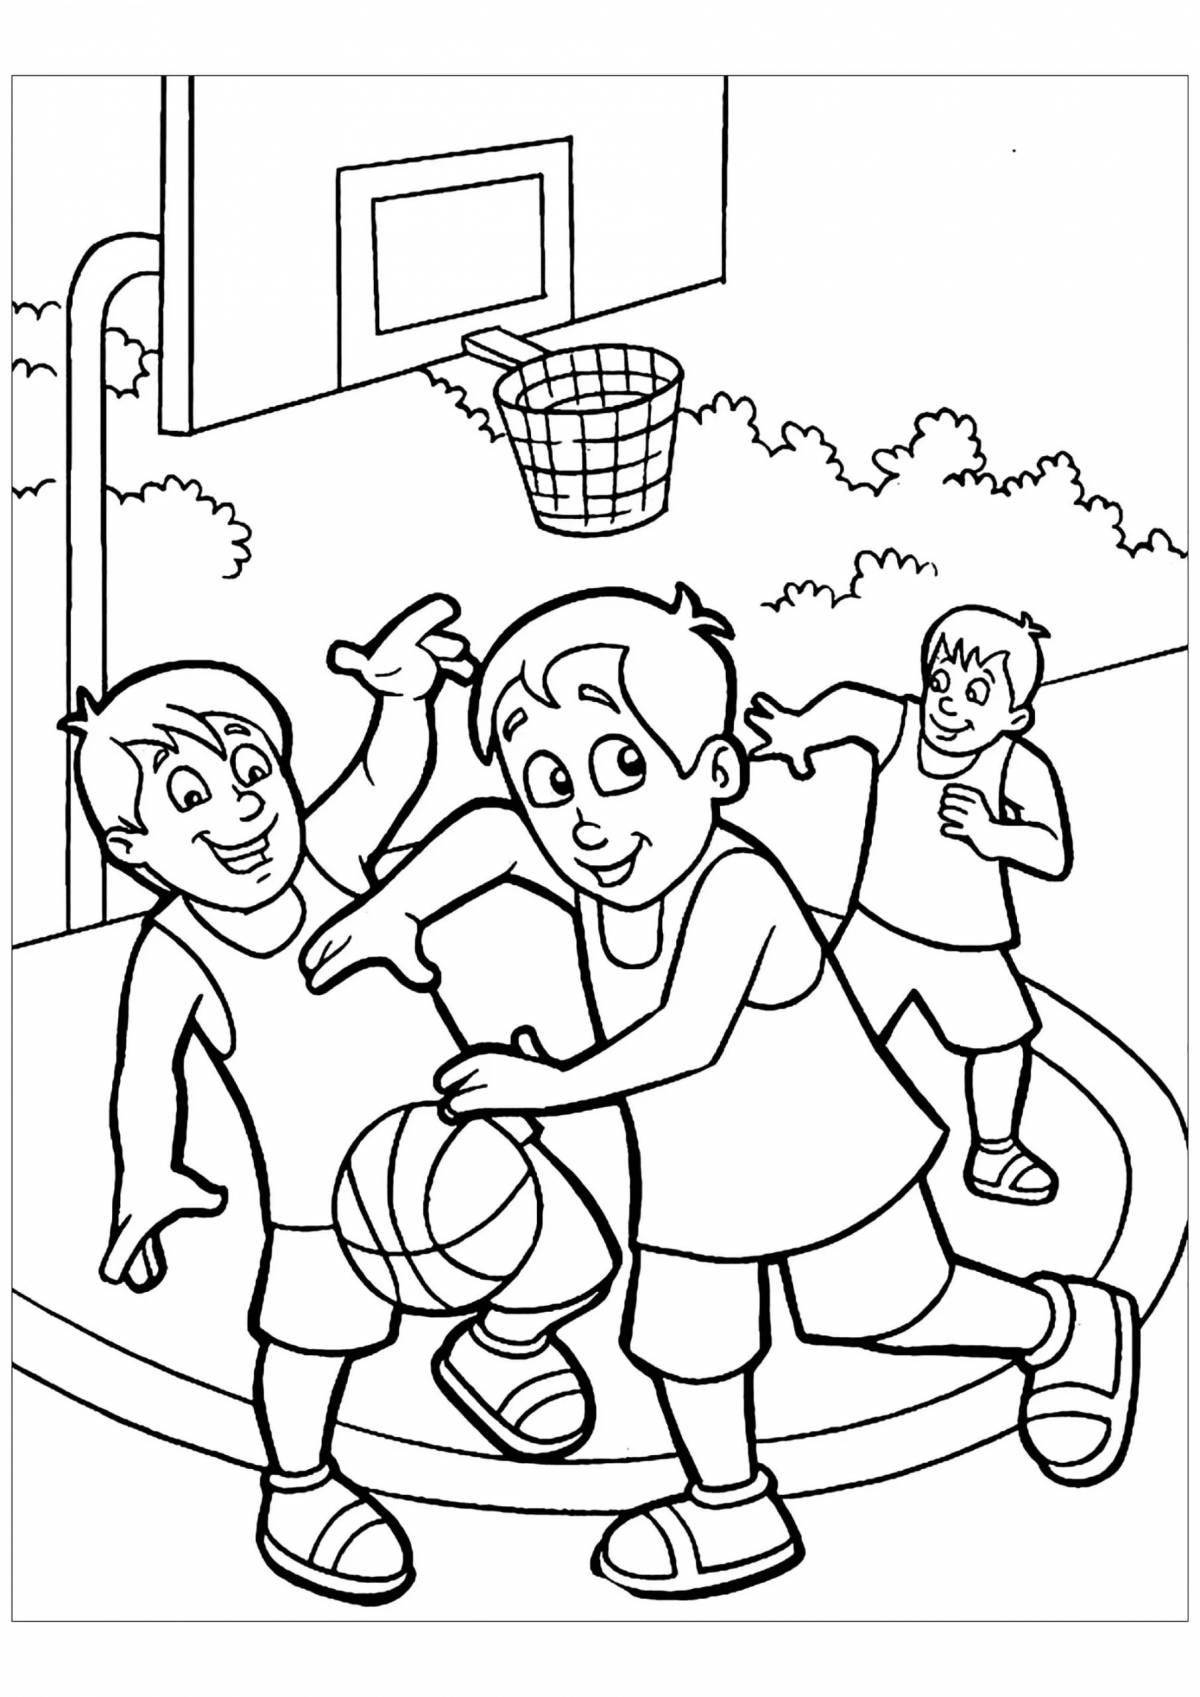 Color-frenzy gimme game coloring page